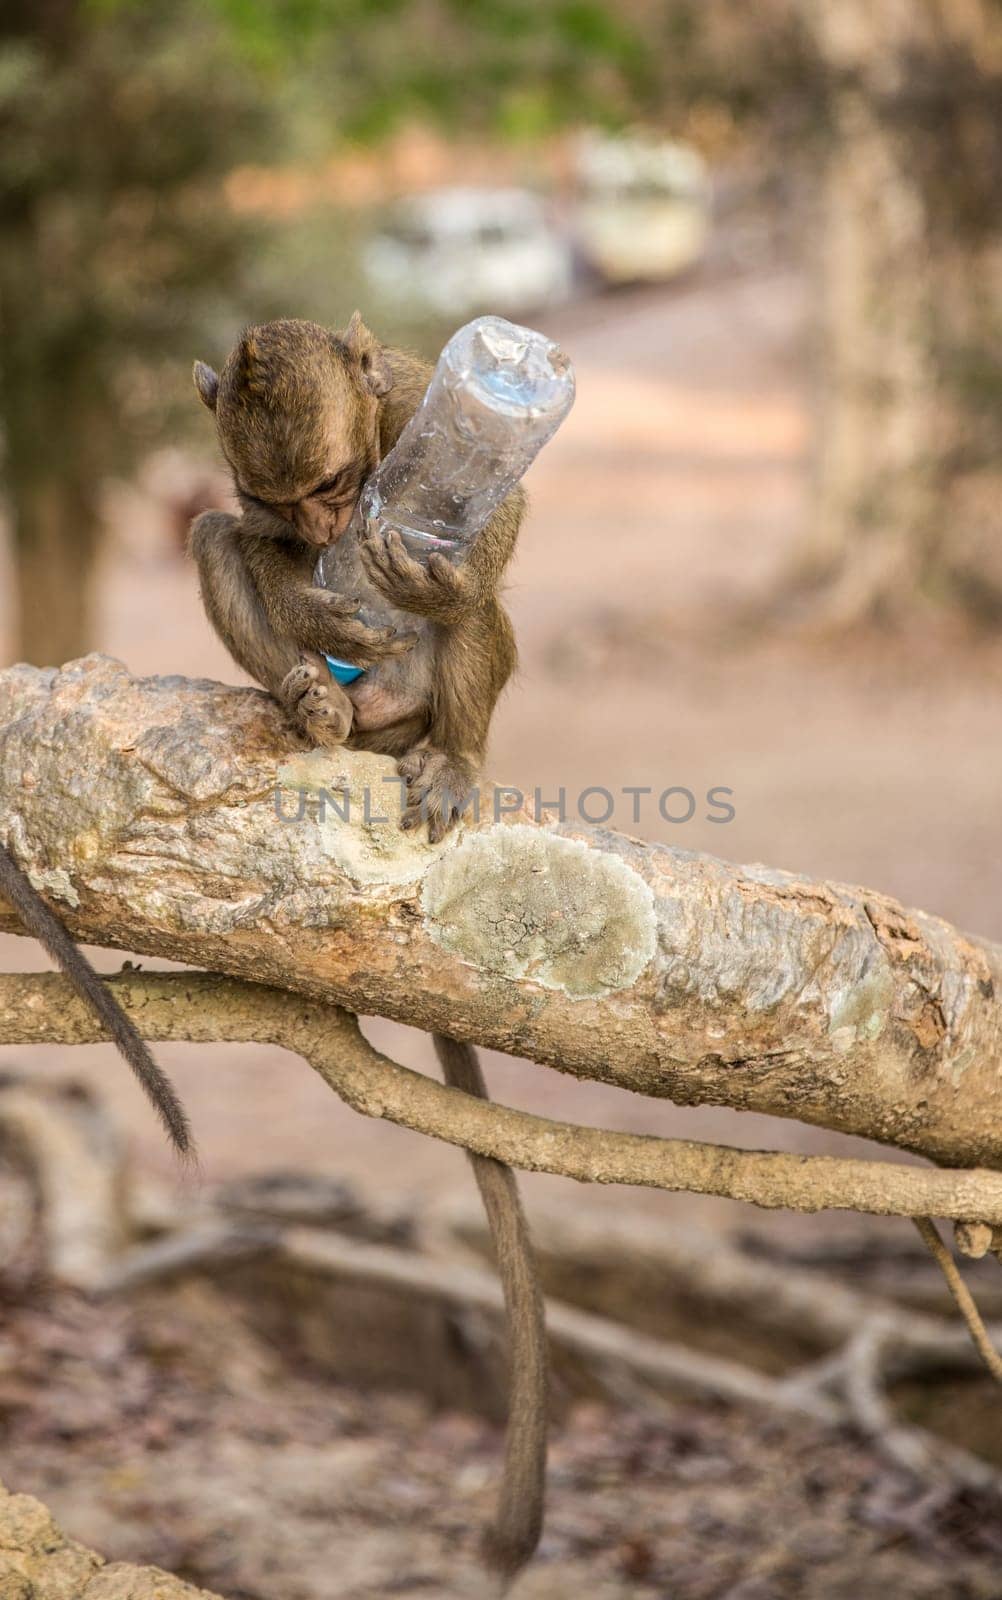 Monkey with Water Bottle by TopCreativePhotography